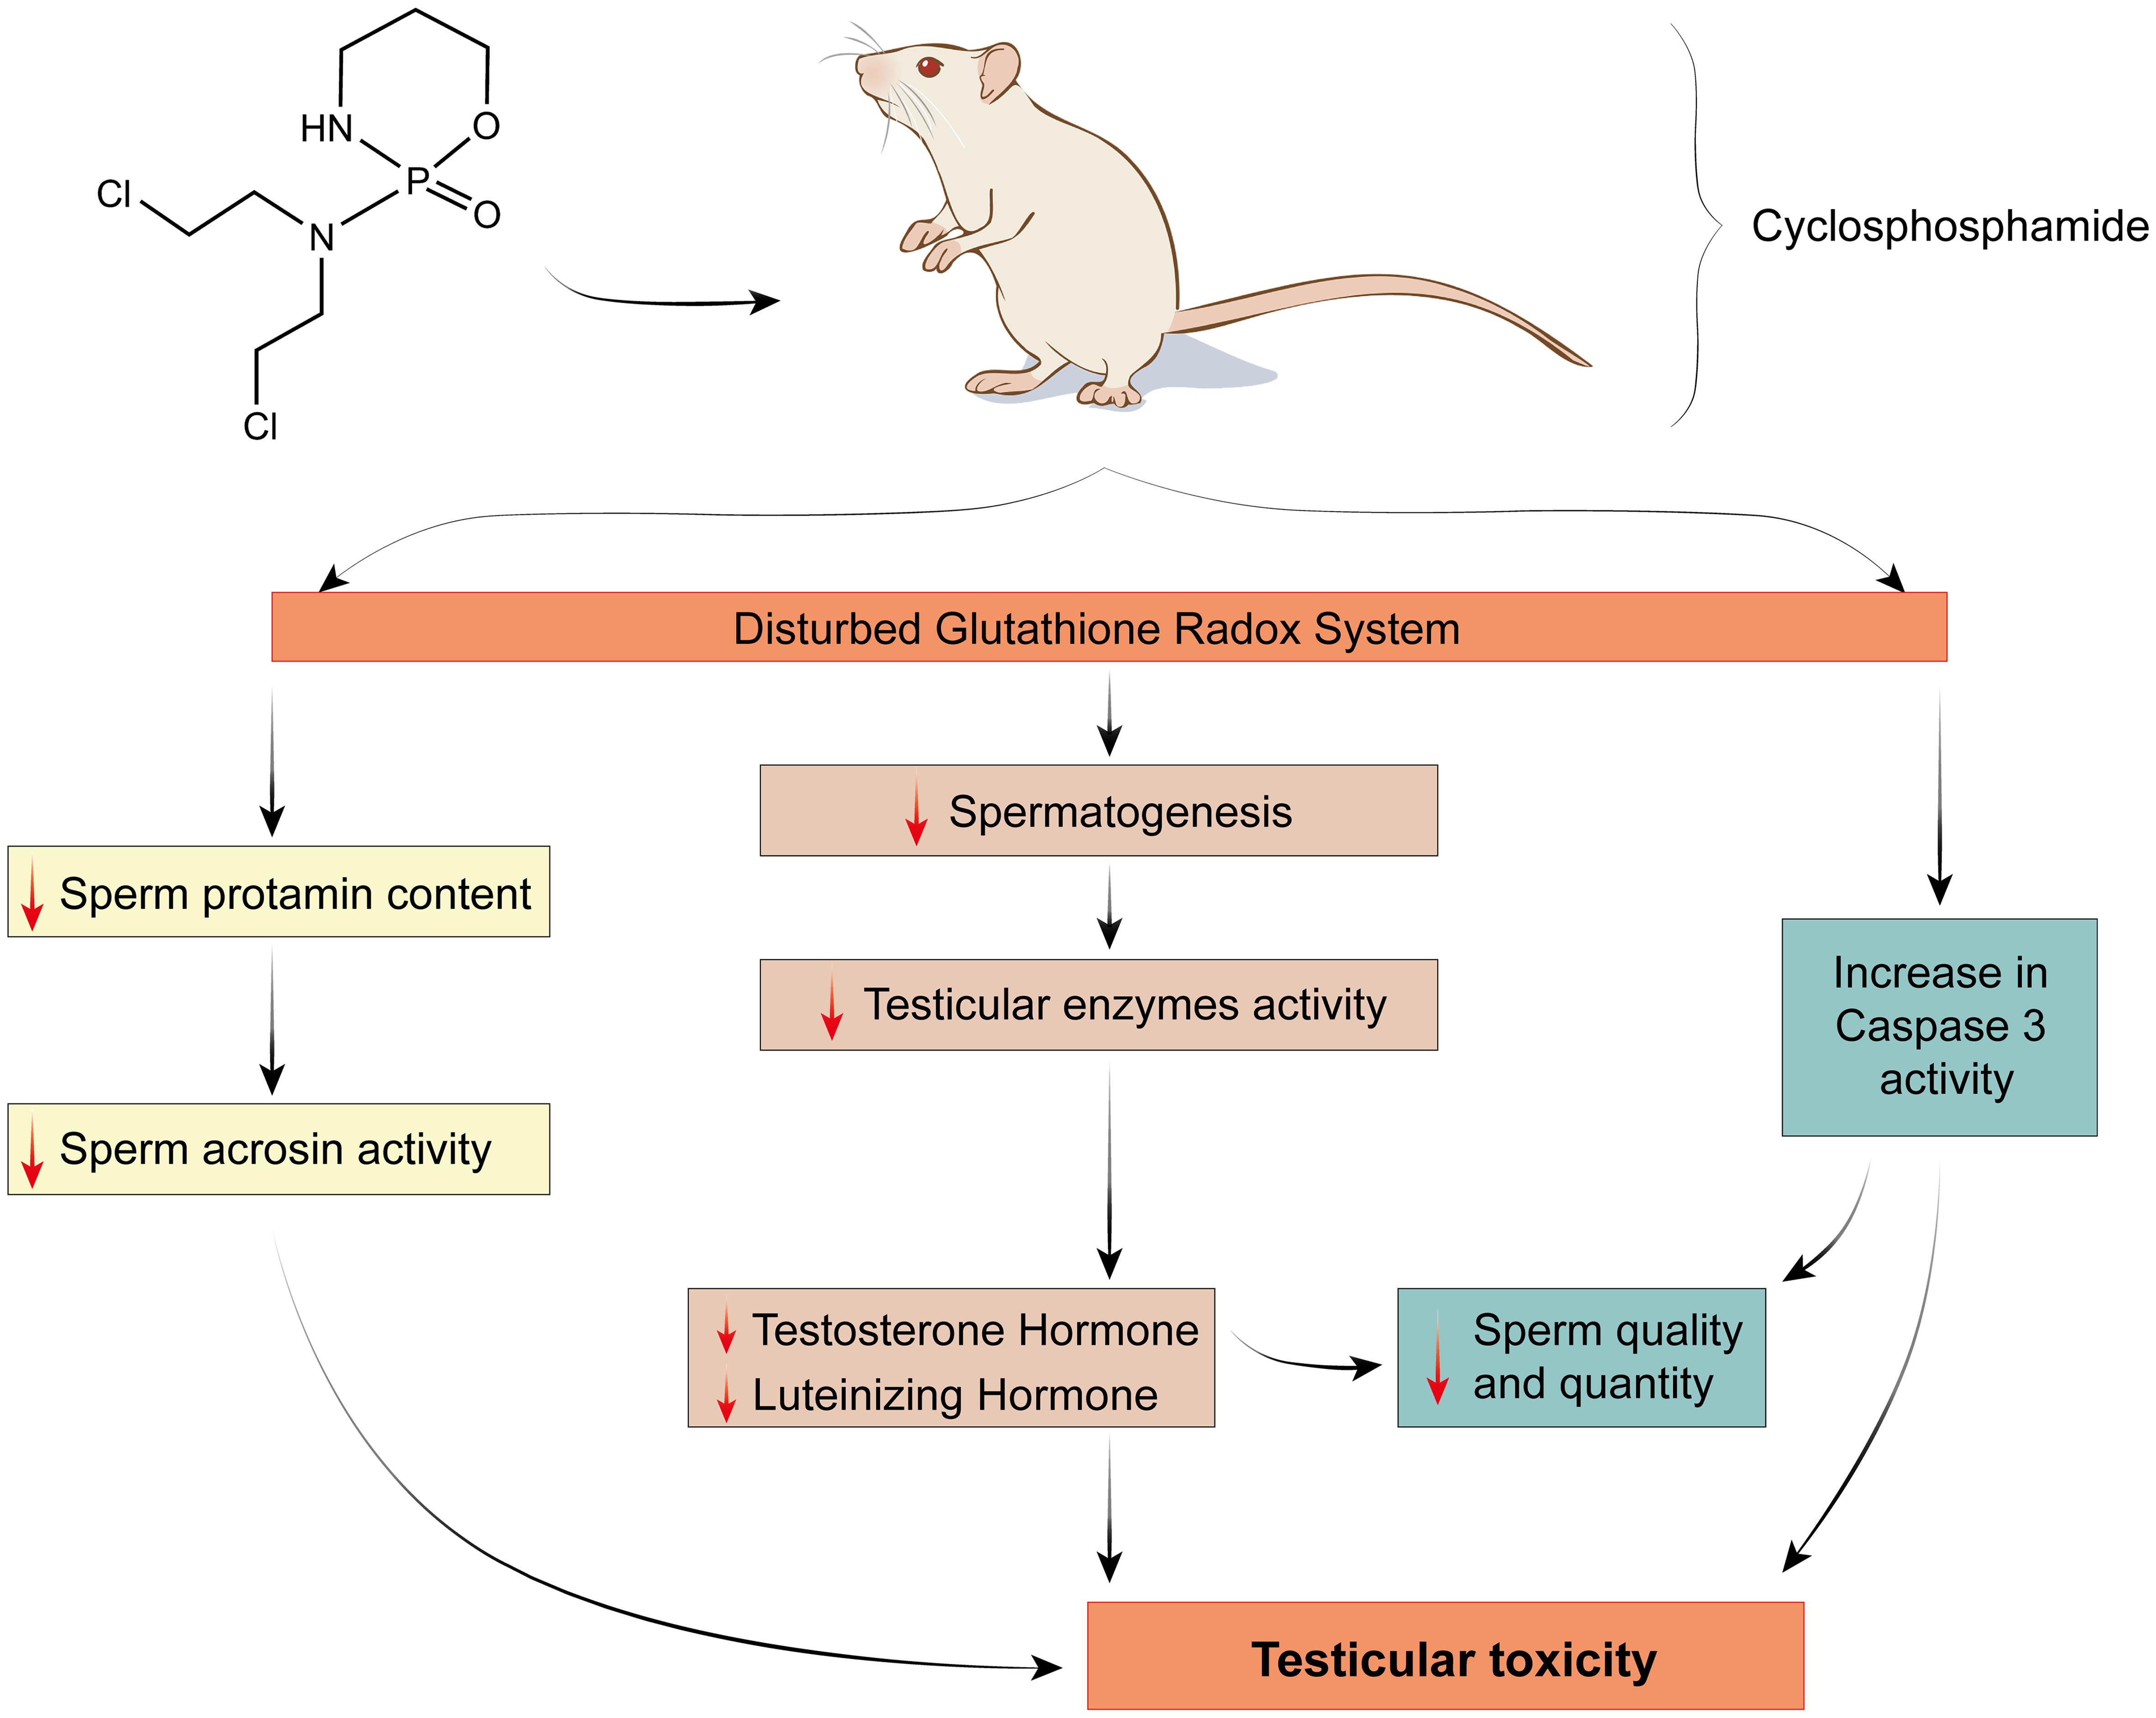 The mechanism of cyclophosphamide associated with disturbed glutathione redox system and increased caspase 3 activity results in decreased male sex hormone levels, poor sperm quality, and testicular toxicity.